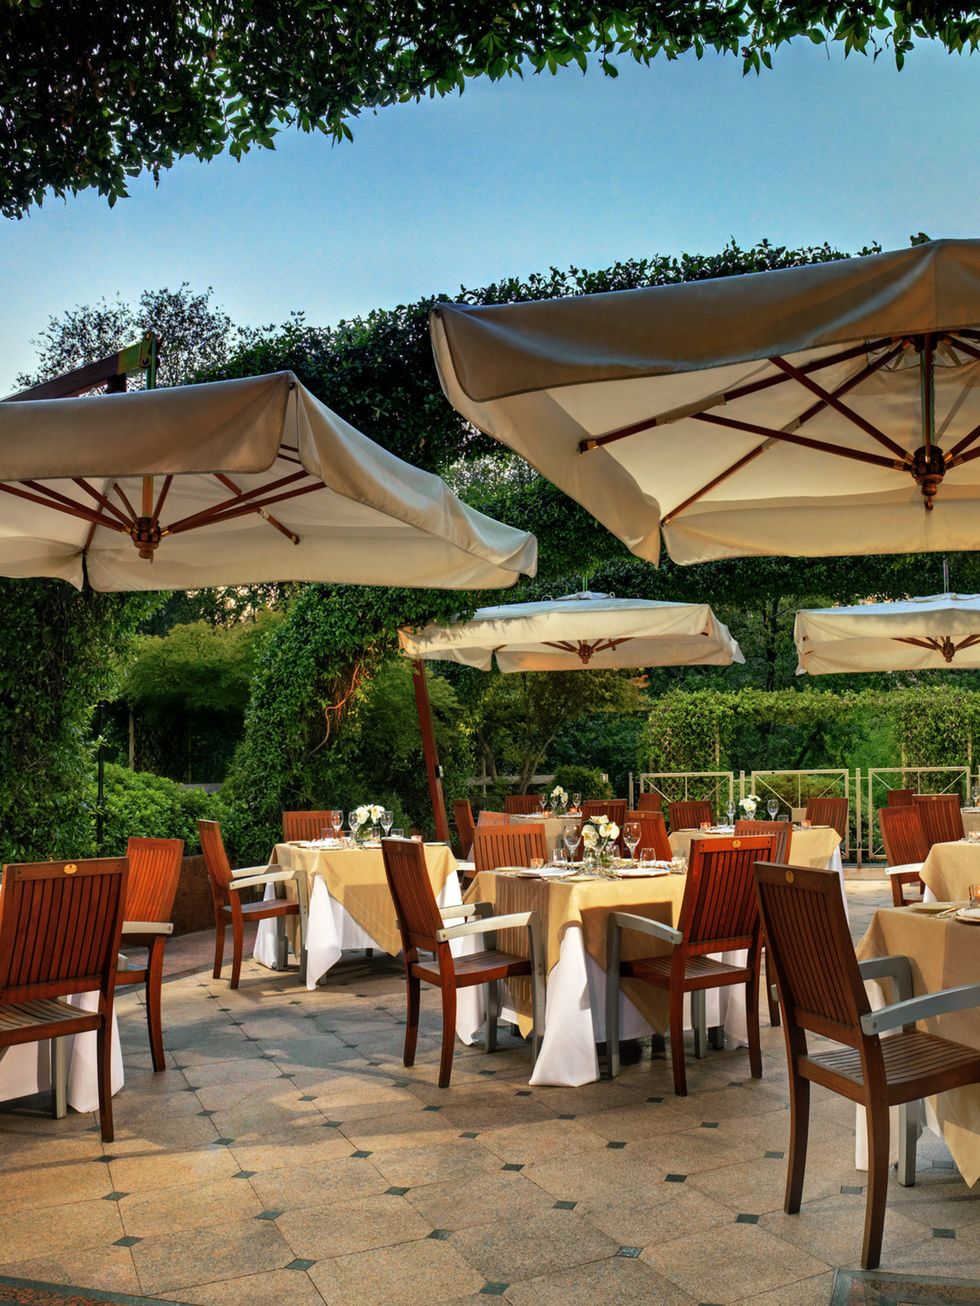 Furniture, Table, Chair, Outdoor table, Restaurant, Shade, Outdoor furniture, Function hall, Linens, Outdoor structure, 